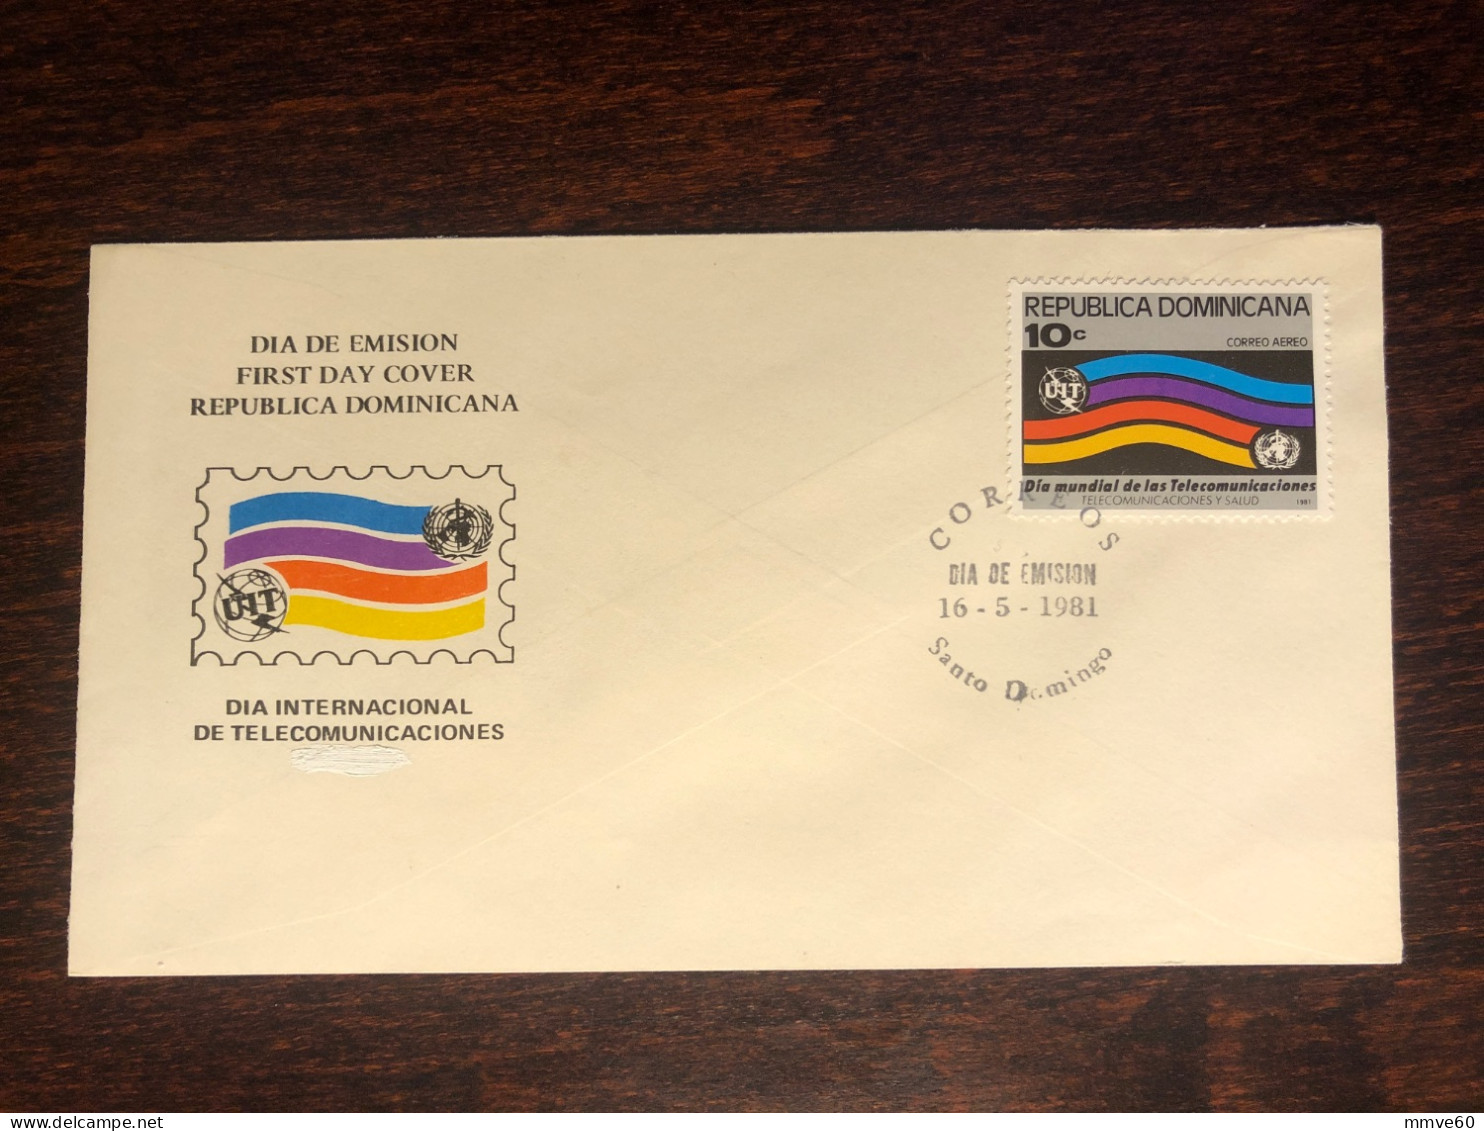 DOMINICAN FDC COVER 1981 YEAR  TELECOMMUNICATIONS AND HEALTH MEDICINE STAMPS - Dominican Republic